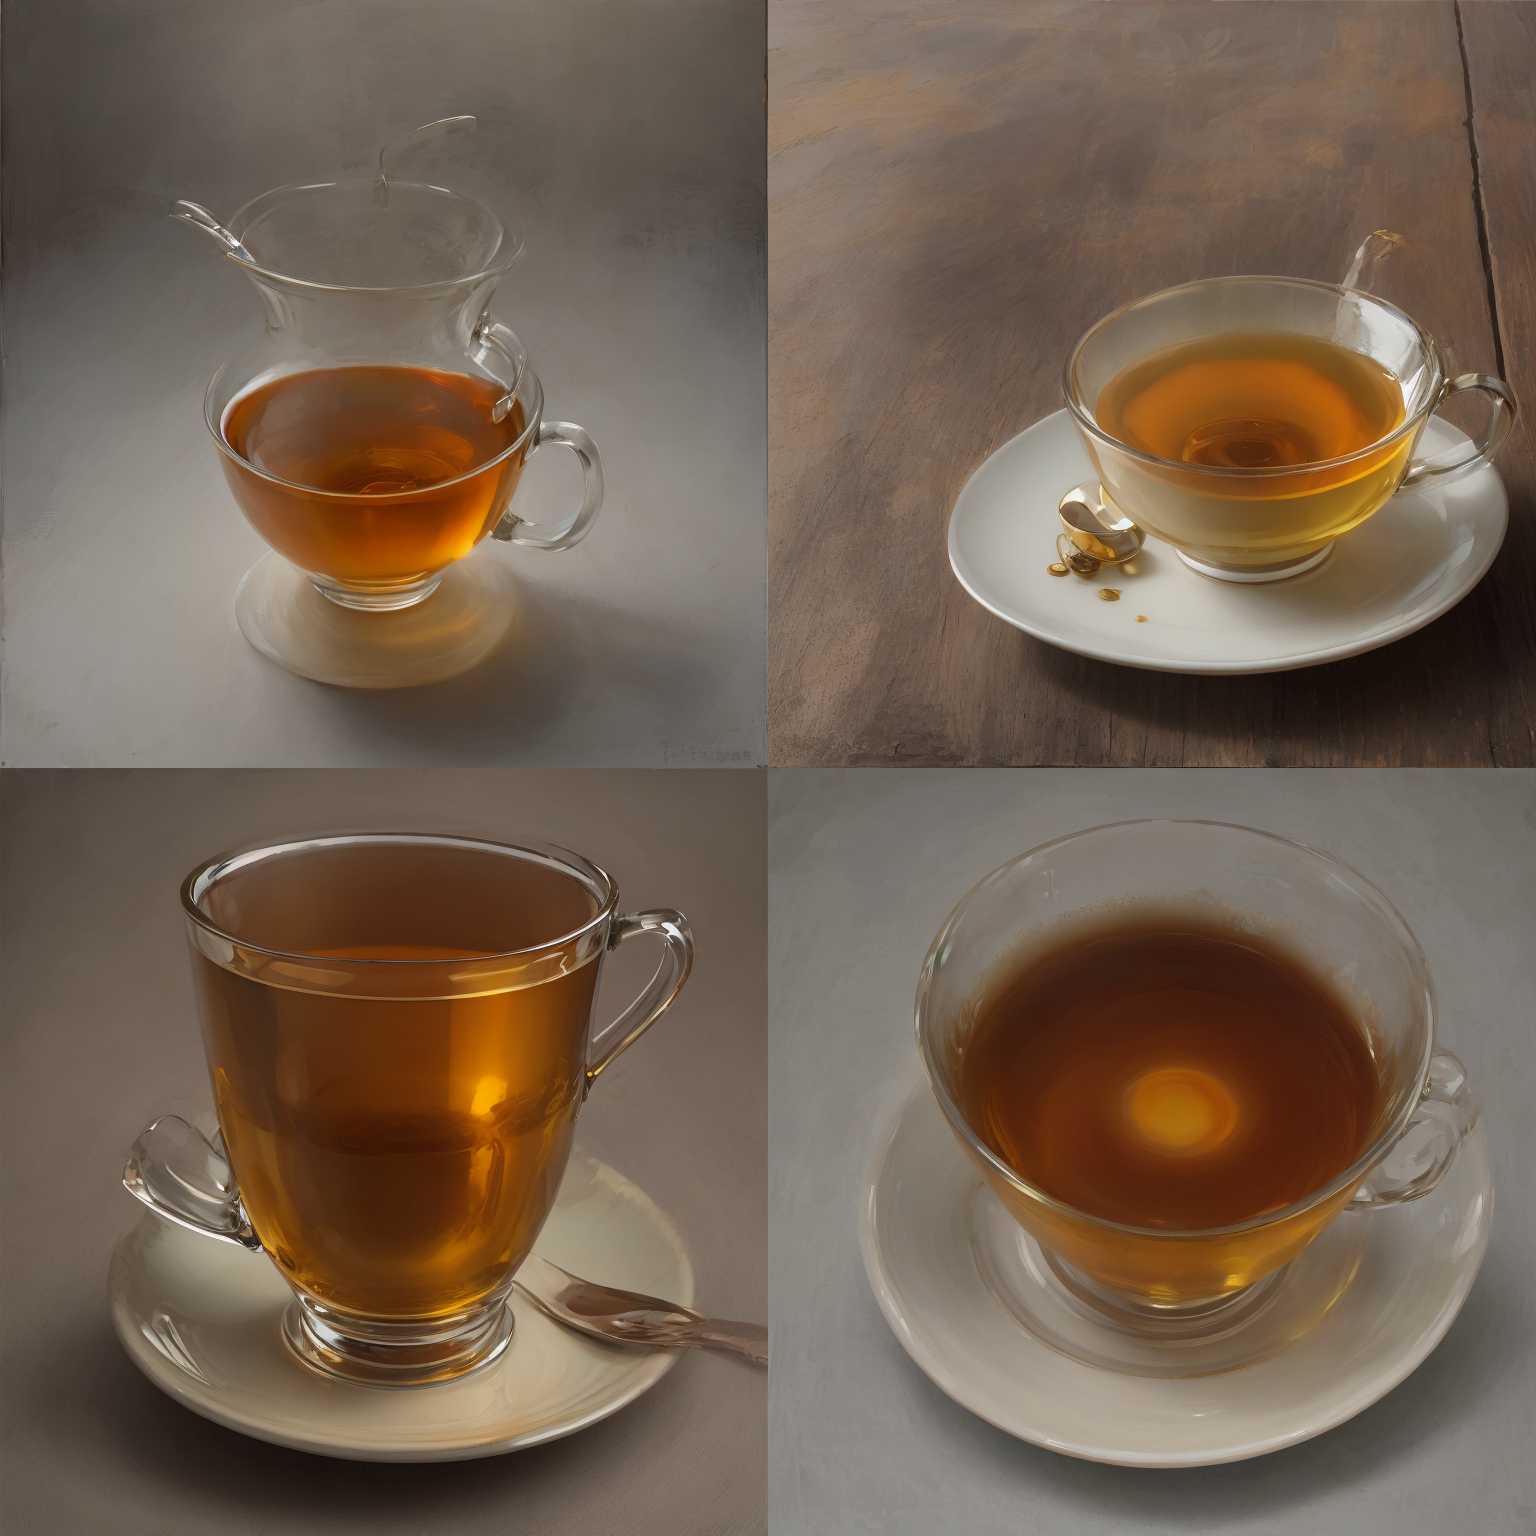 A cup of oil